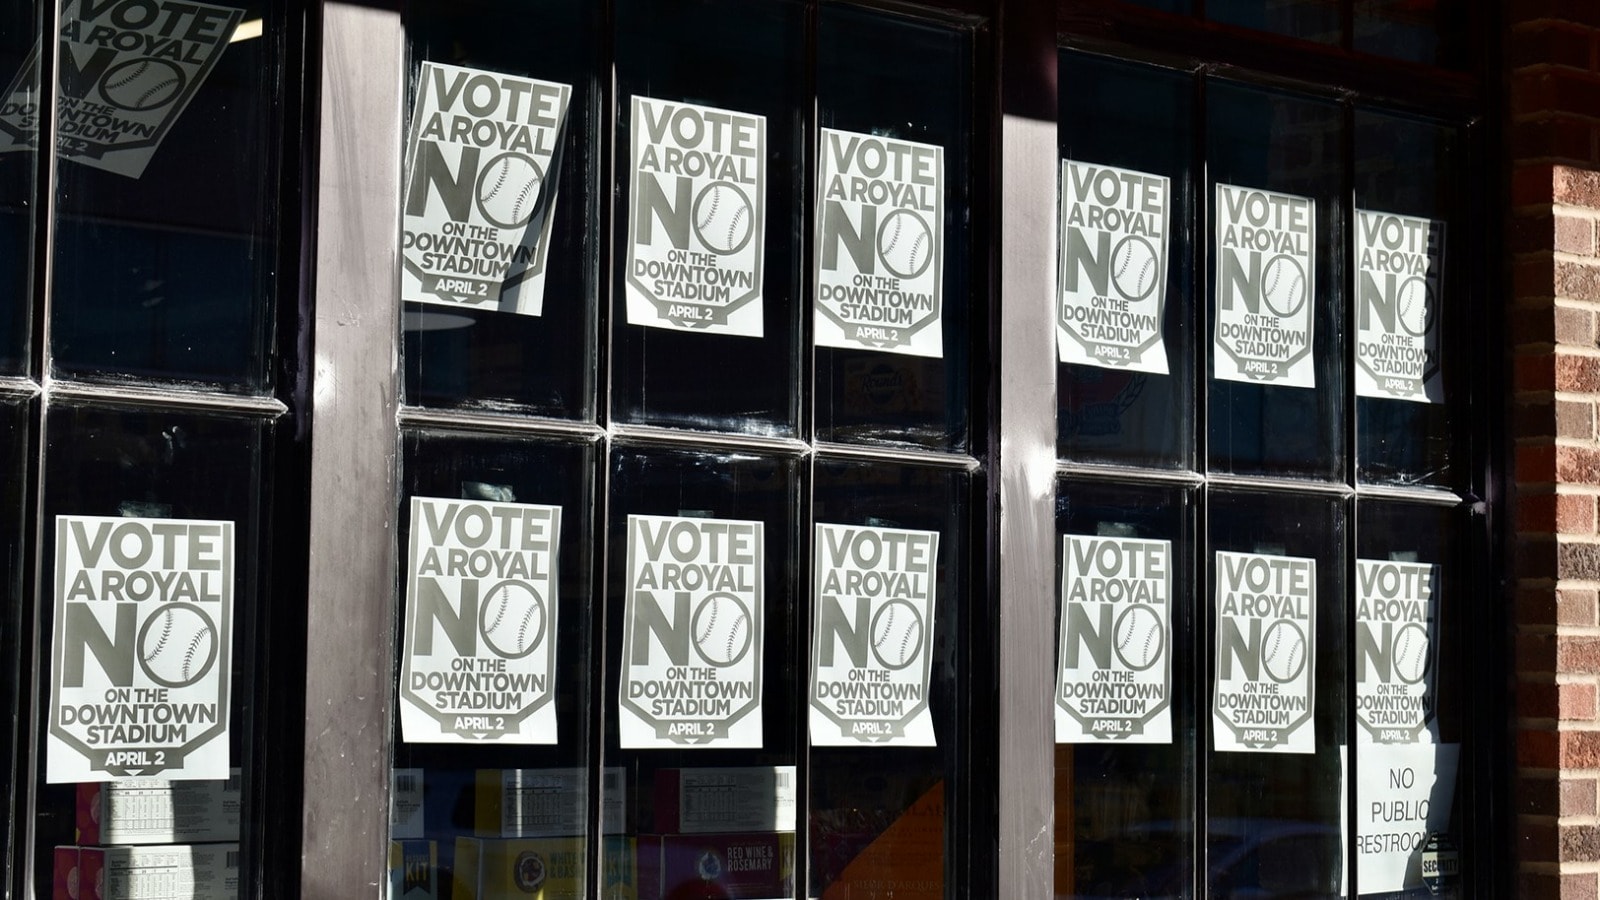 “Vote No” signs stuck in the windows on The Pairing in the East Crossroads.